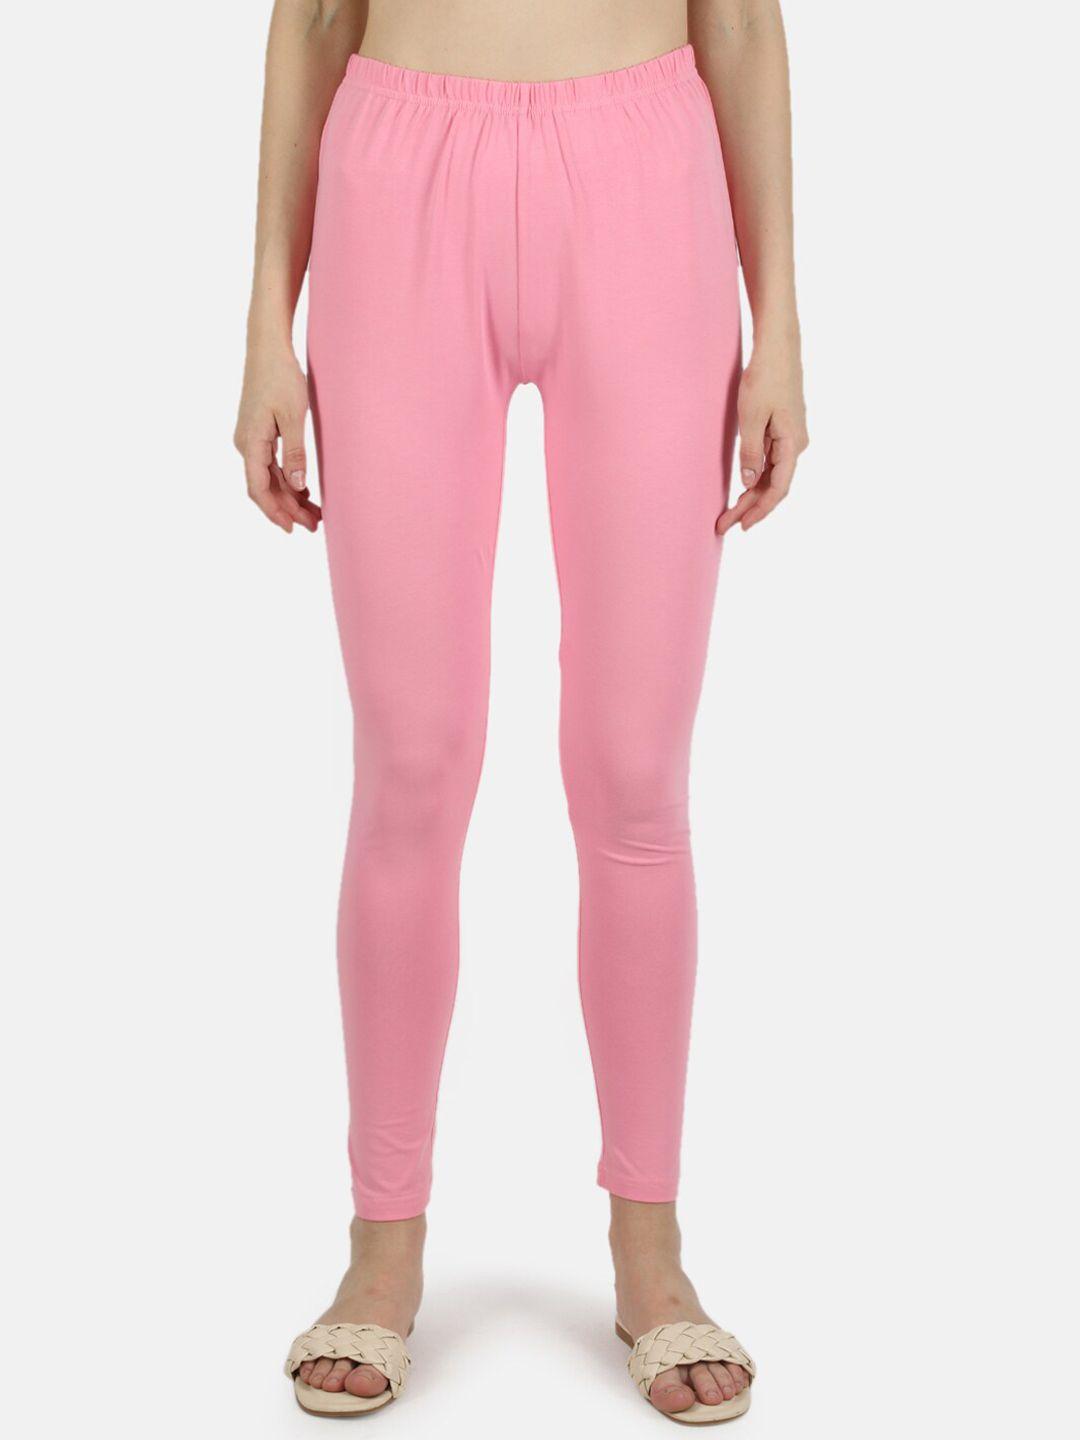 monte carlo women pink solid ankle-length leggings